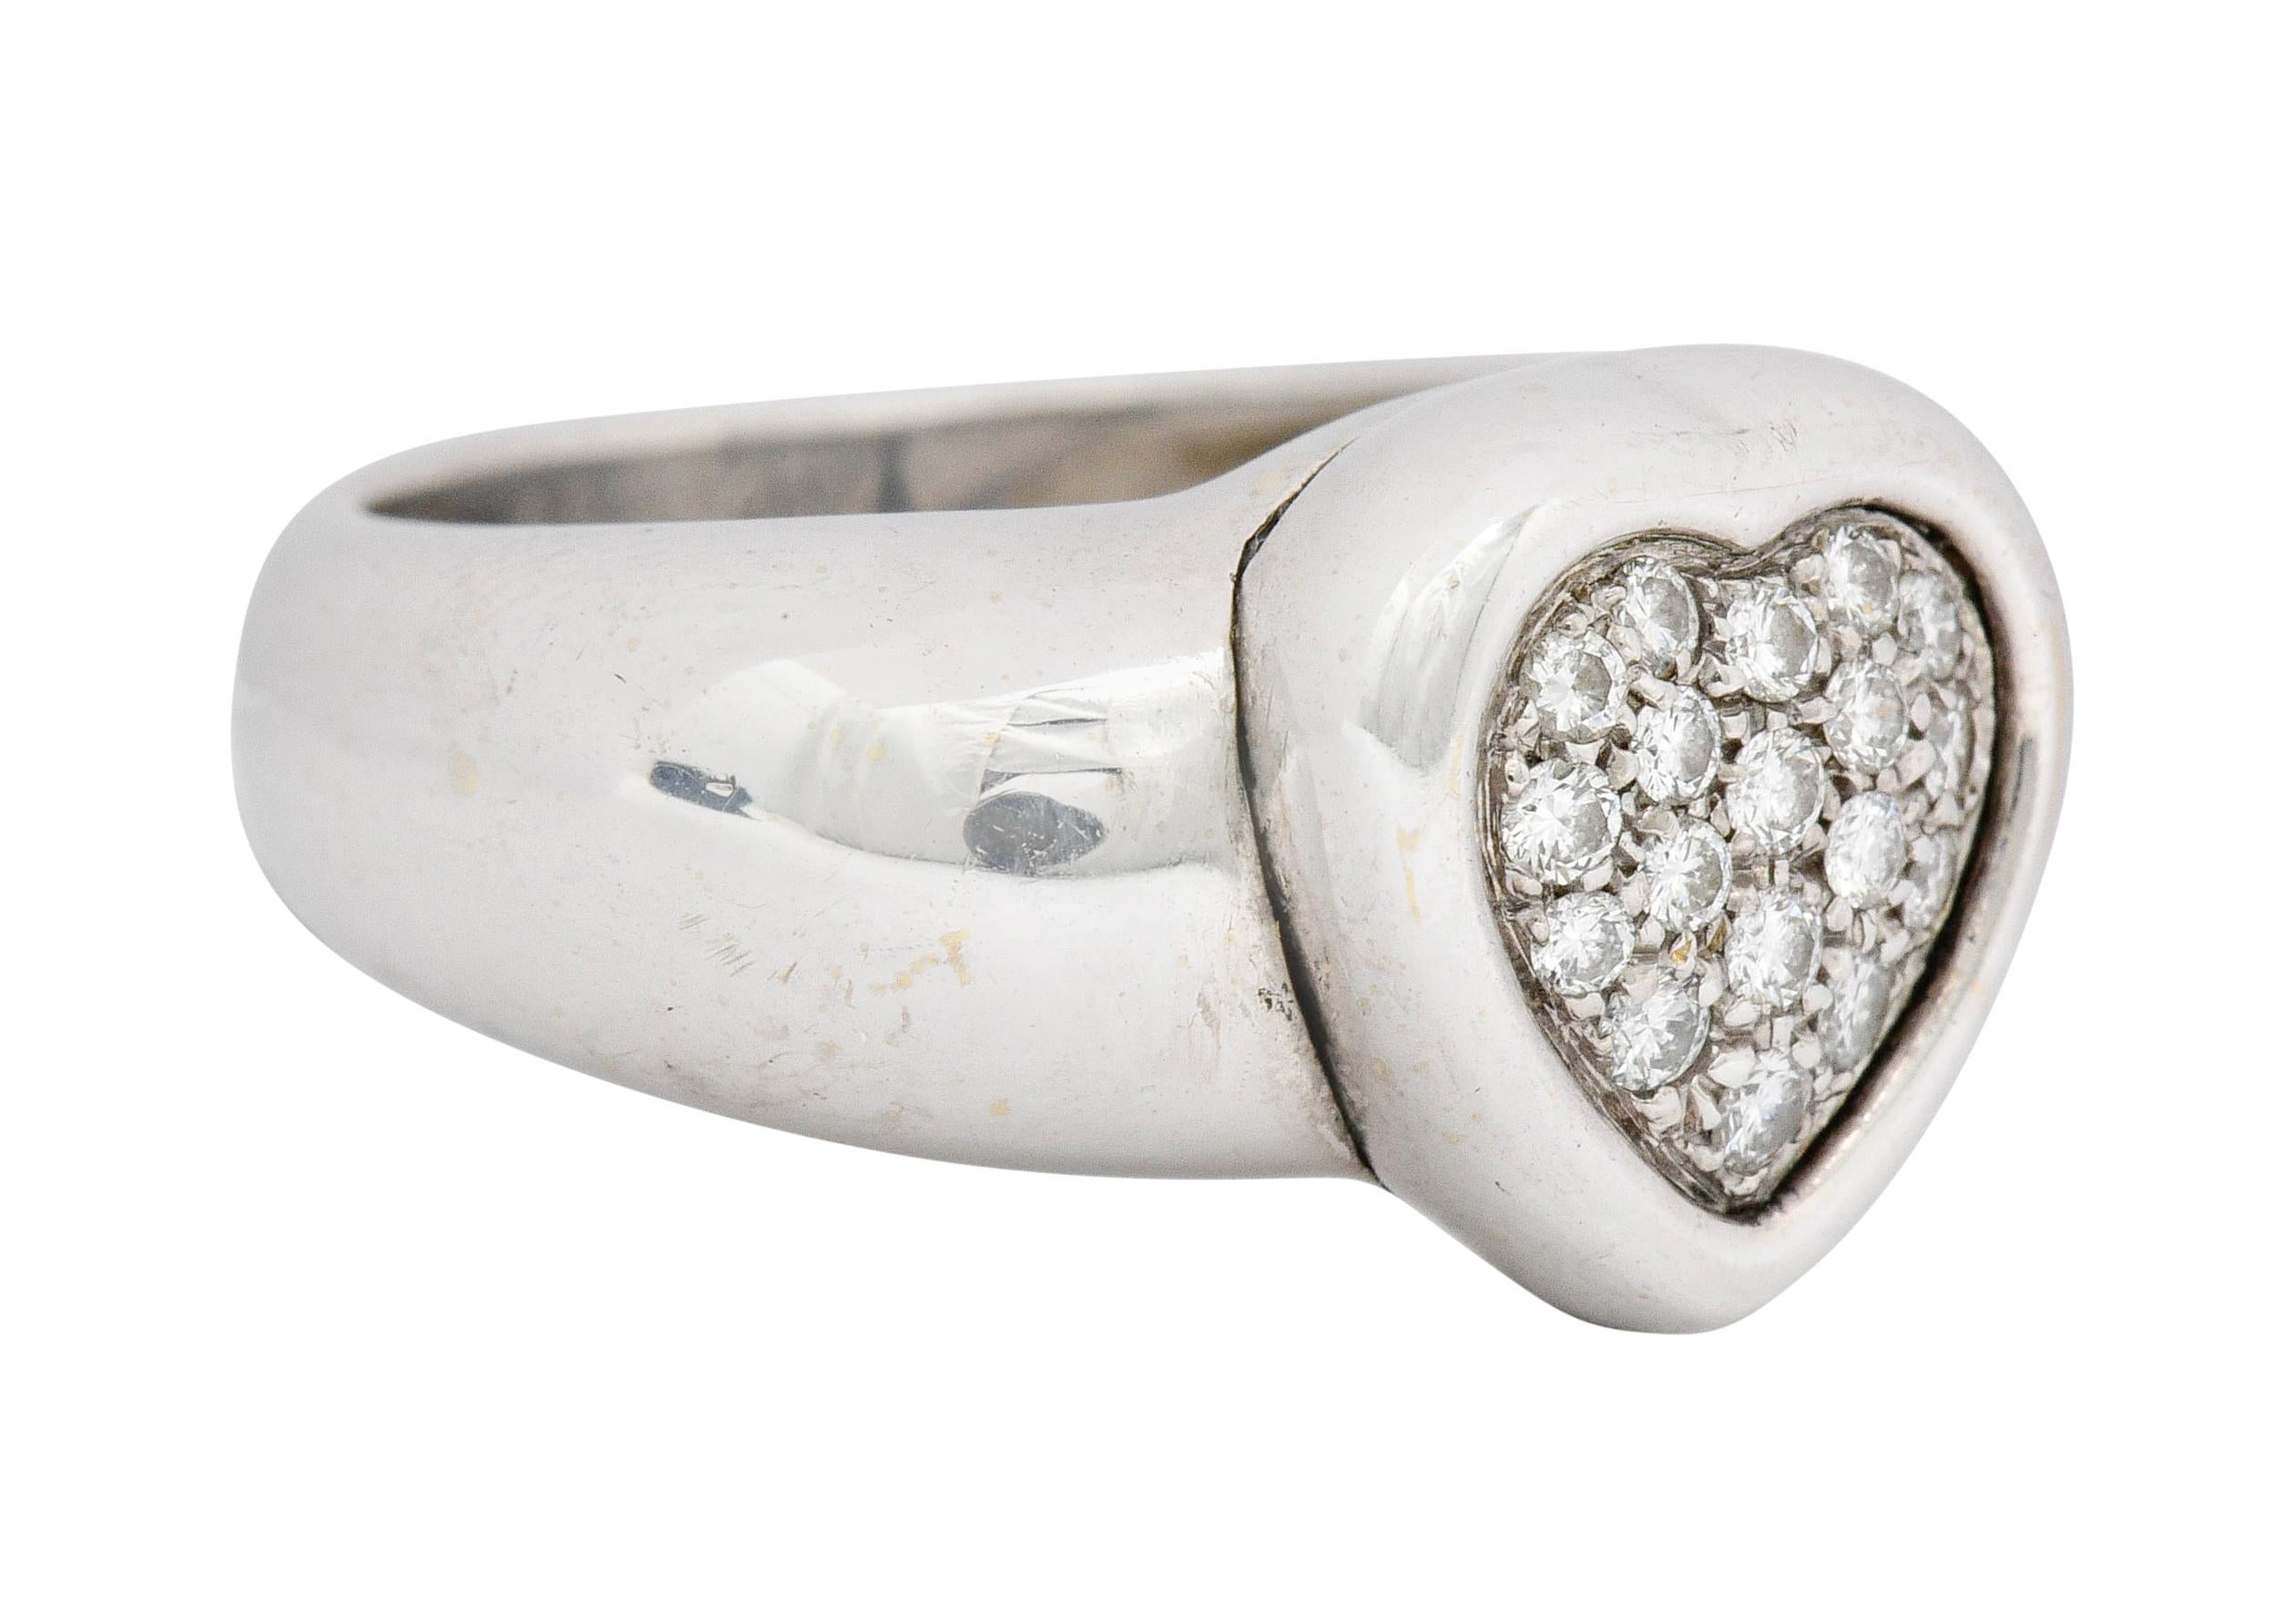 Puffed band ring centering a sweet heart design

Pavé set with round brilliant cut diamonds weighing approximately 0.36 carat, G/H color with VS clarity

Tested as 18 karat gold

Fully signed Piaget and numbered

Ring Size: 7 & sizable

Measures: